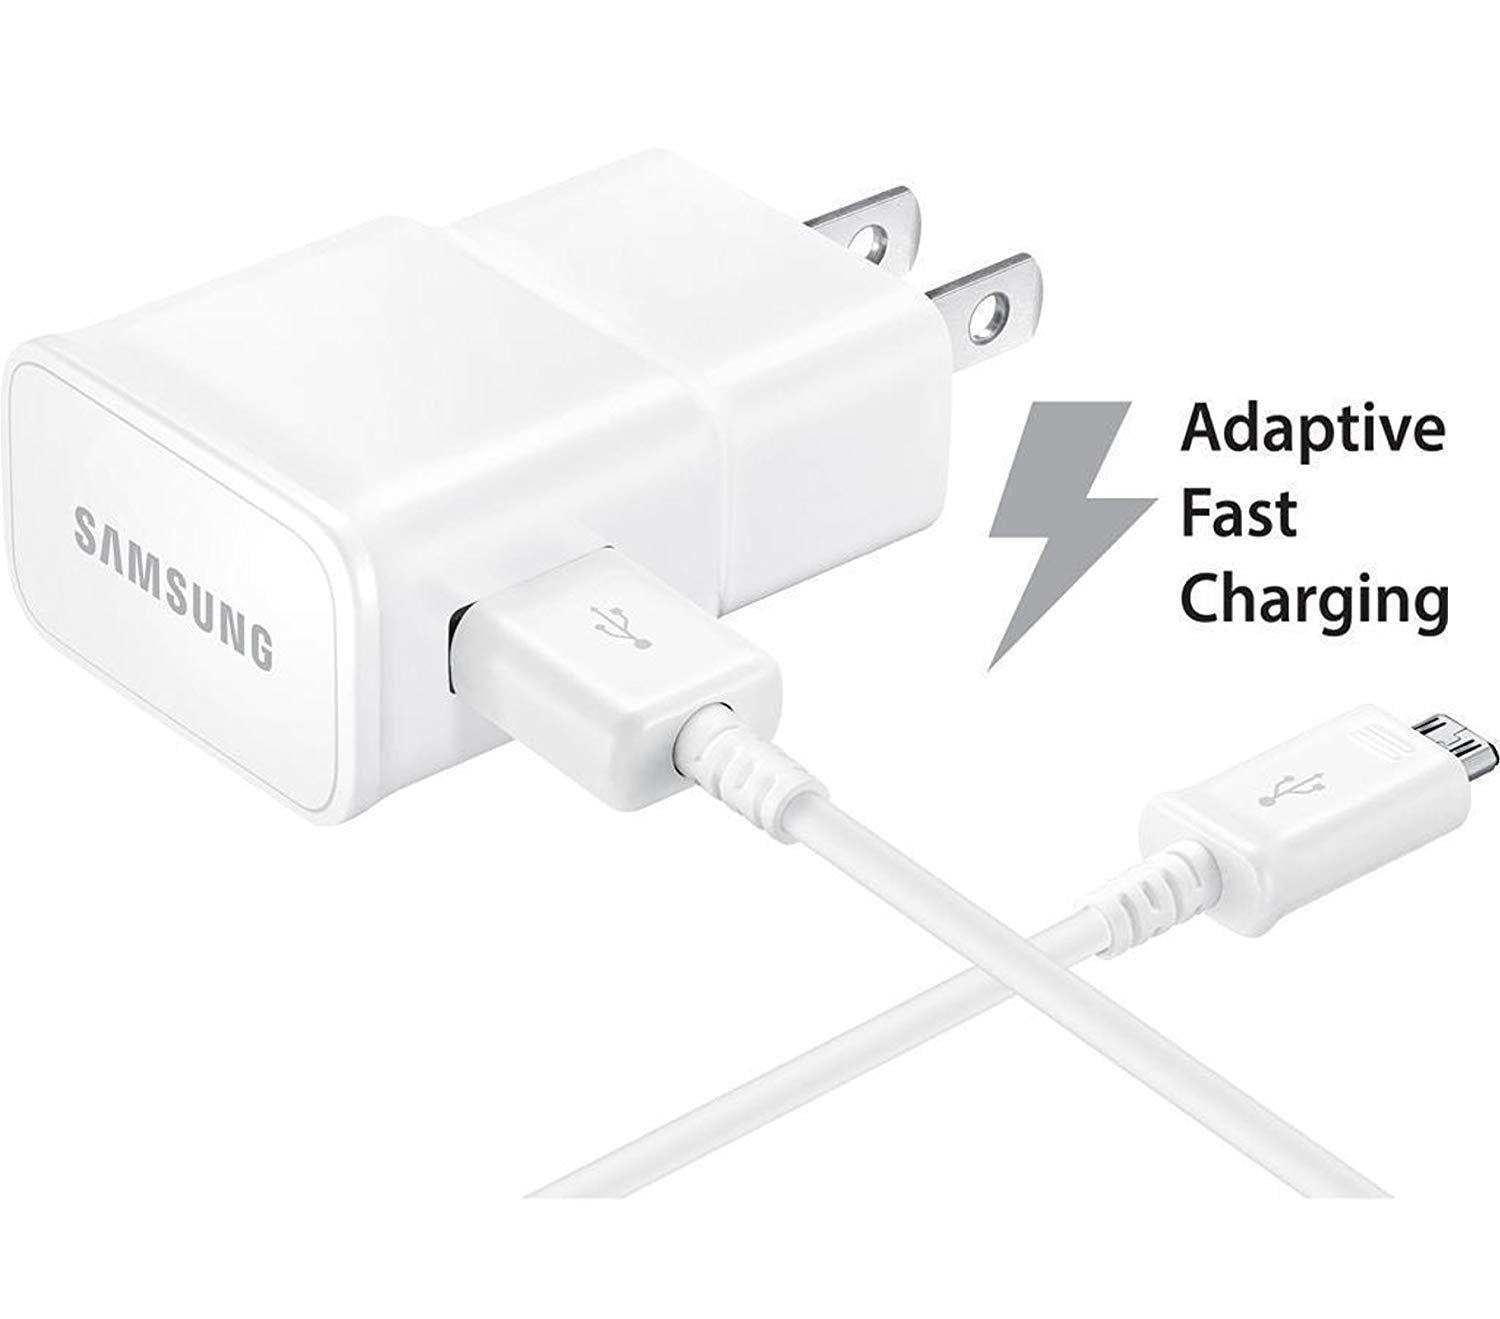 Adaptive Fast Charger Compatible with Motorola Moto G4 Play [Wall Charger + 5 Feet USB Cable] WHITE - New